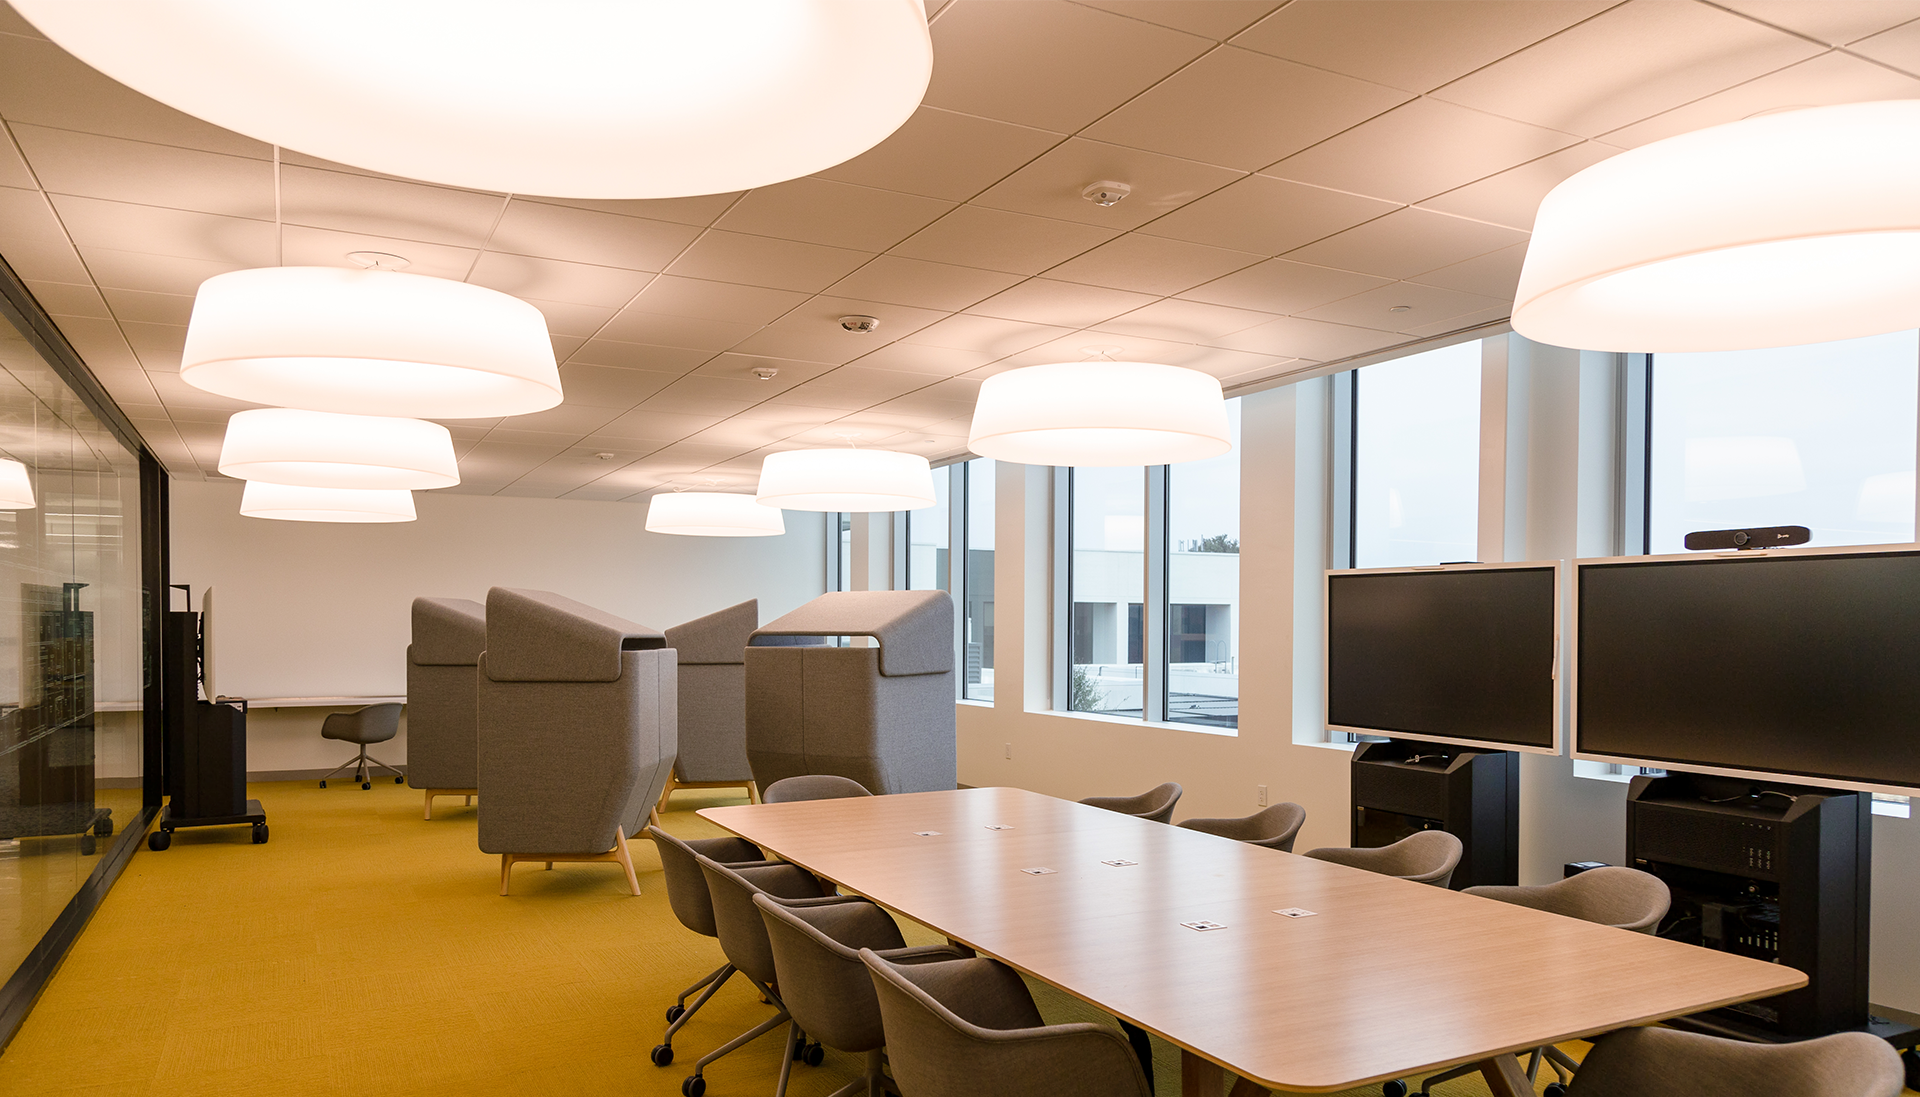 Conference room with overhead light fixtures